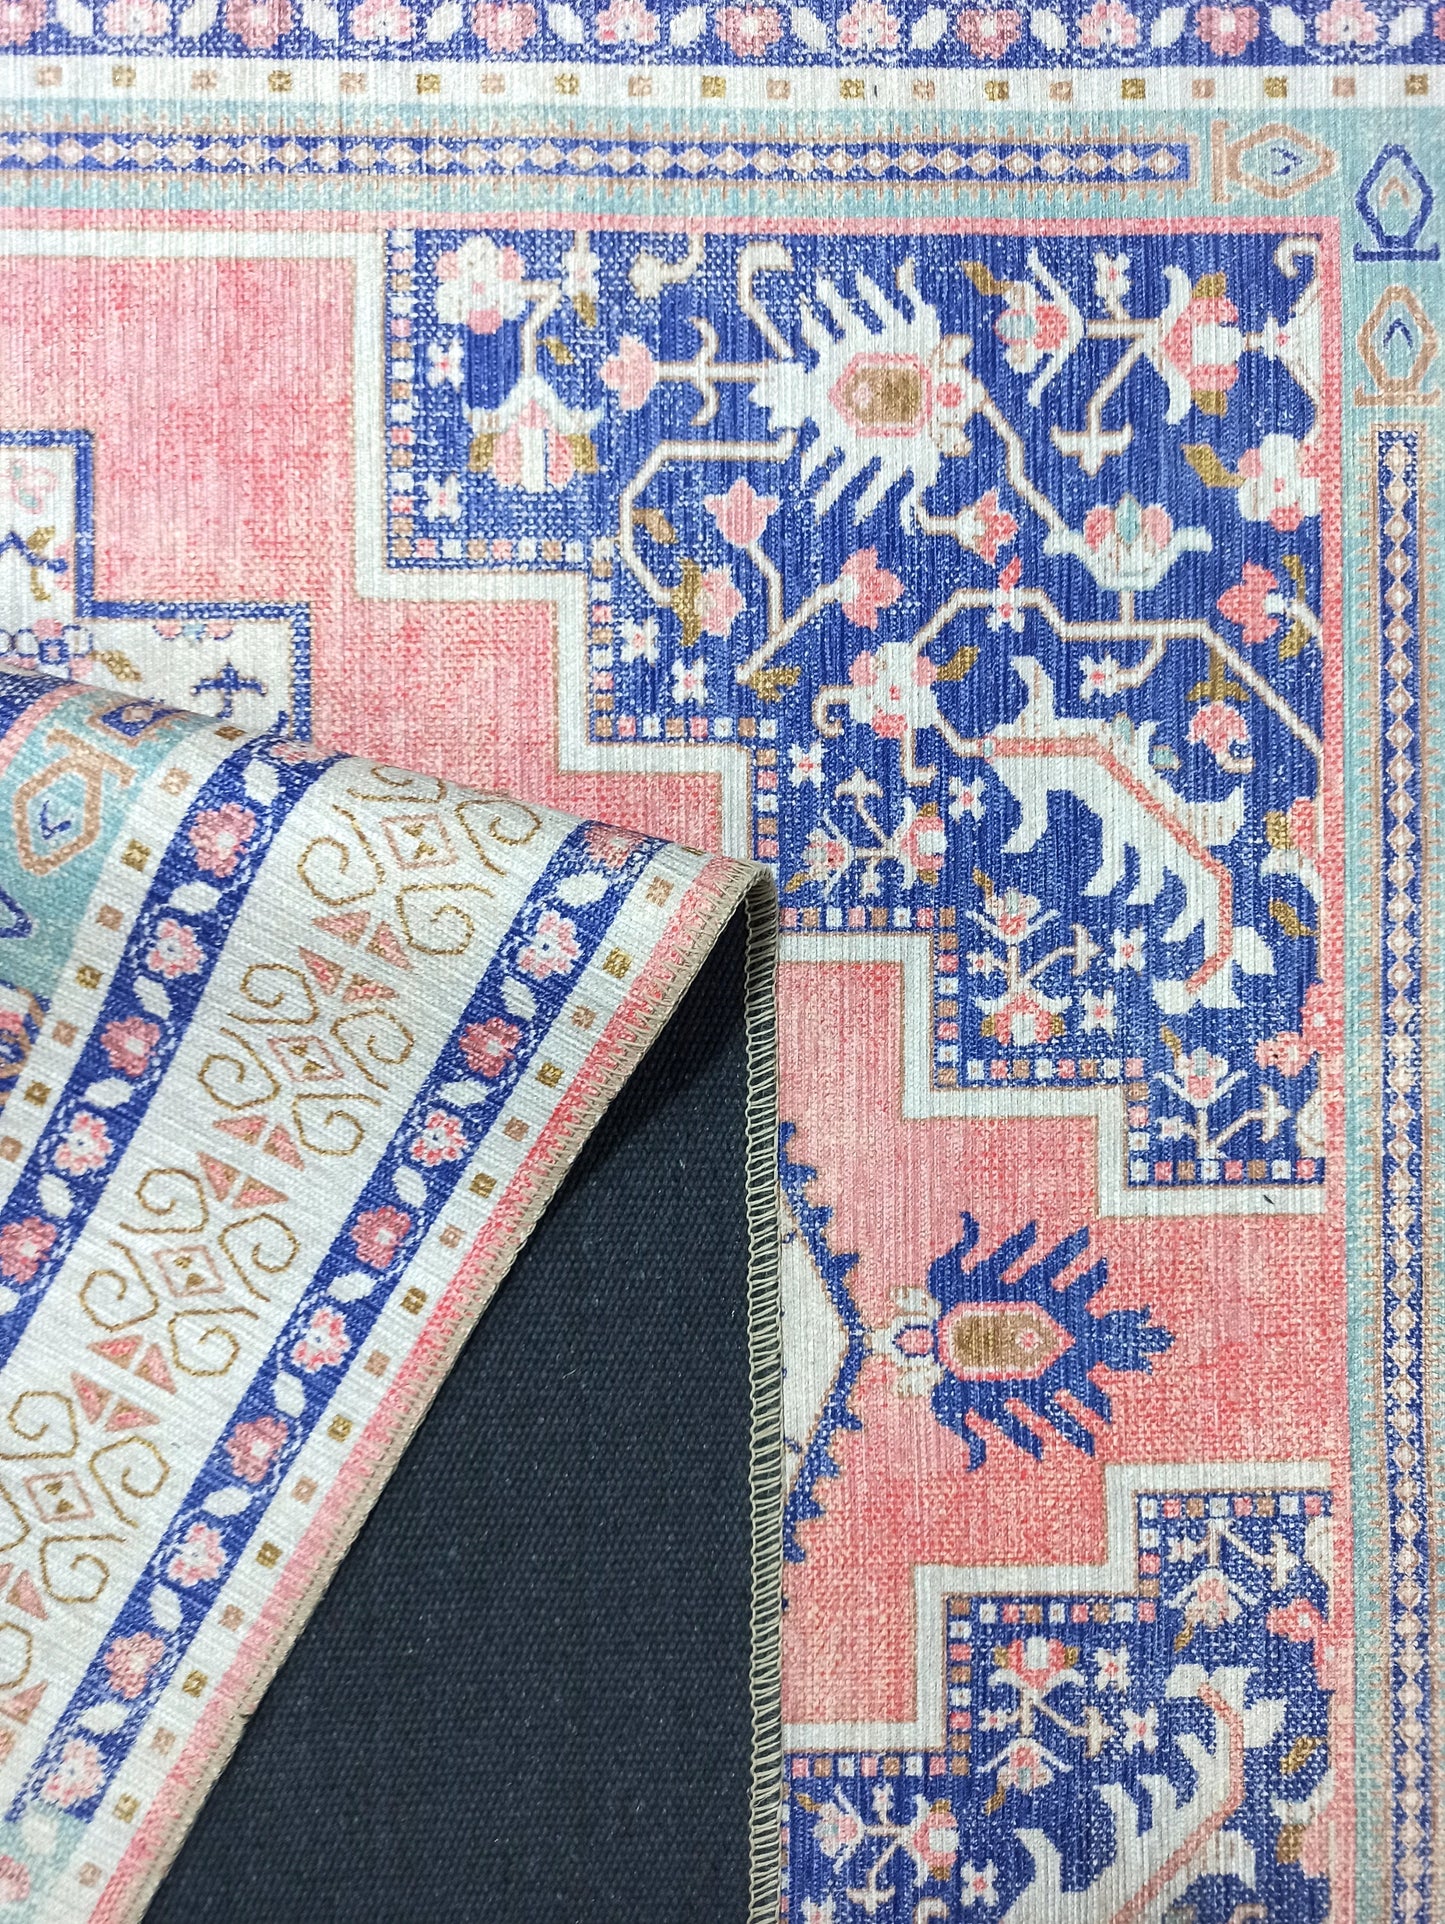 Persian Vintage Rug, Shades of Pale Pink & Midnight Navy Blue Oriental Antique Hamadan Inspired Shabby Chic Area Rugs Living room Bedroom